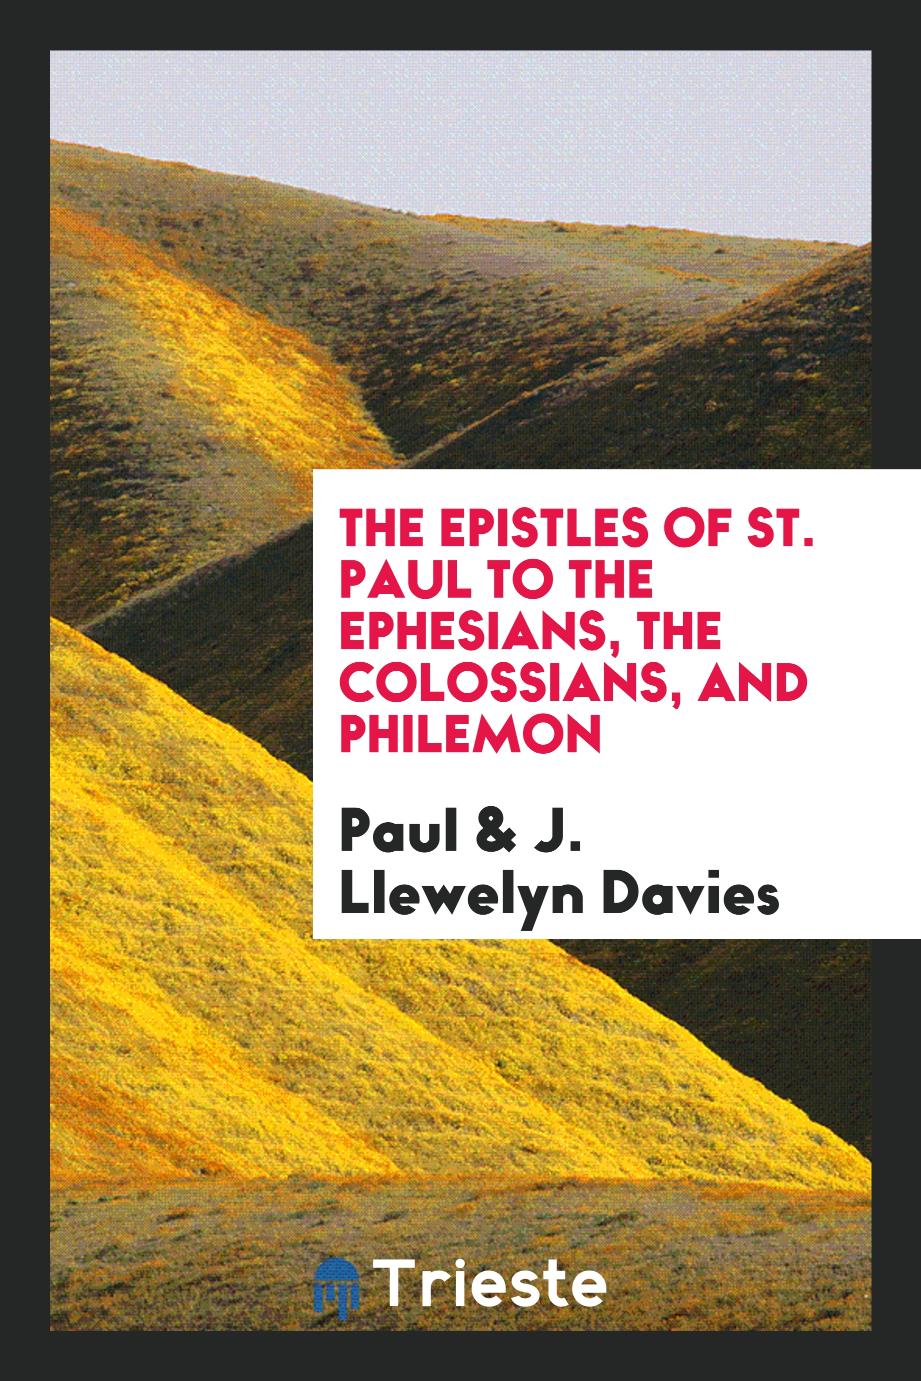 Paul, J. Llewelyn Davies - The Epistles of St. Paul to the Ephesians, the Colossians, and Philemon